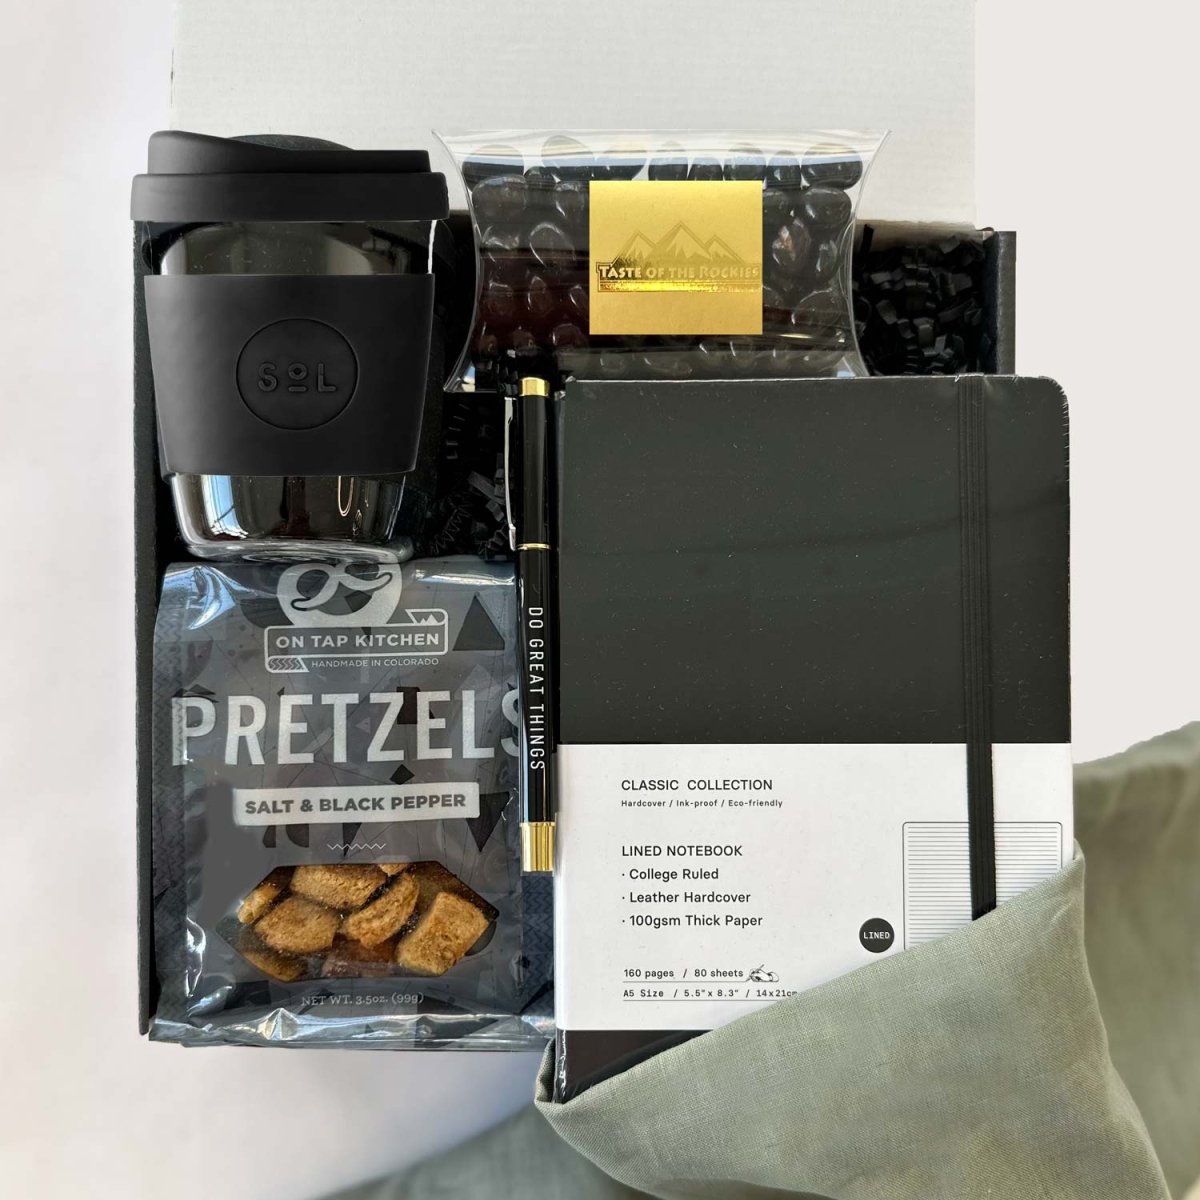 kadoo do great things gift box with black sol cup, pretzel, black notebook, pen, espresso beans candy and more